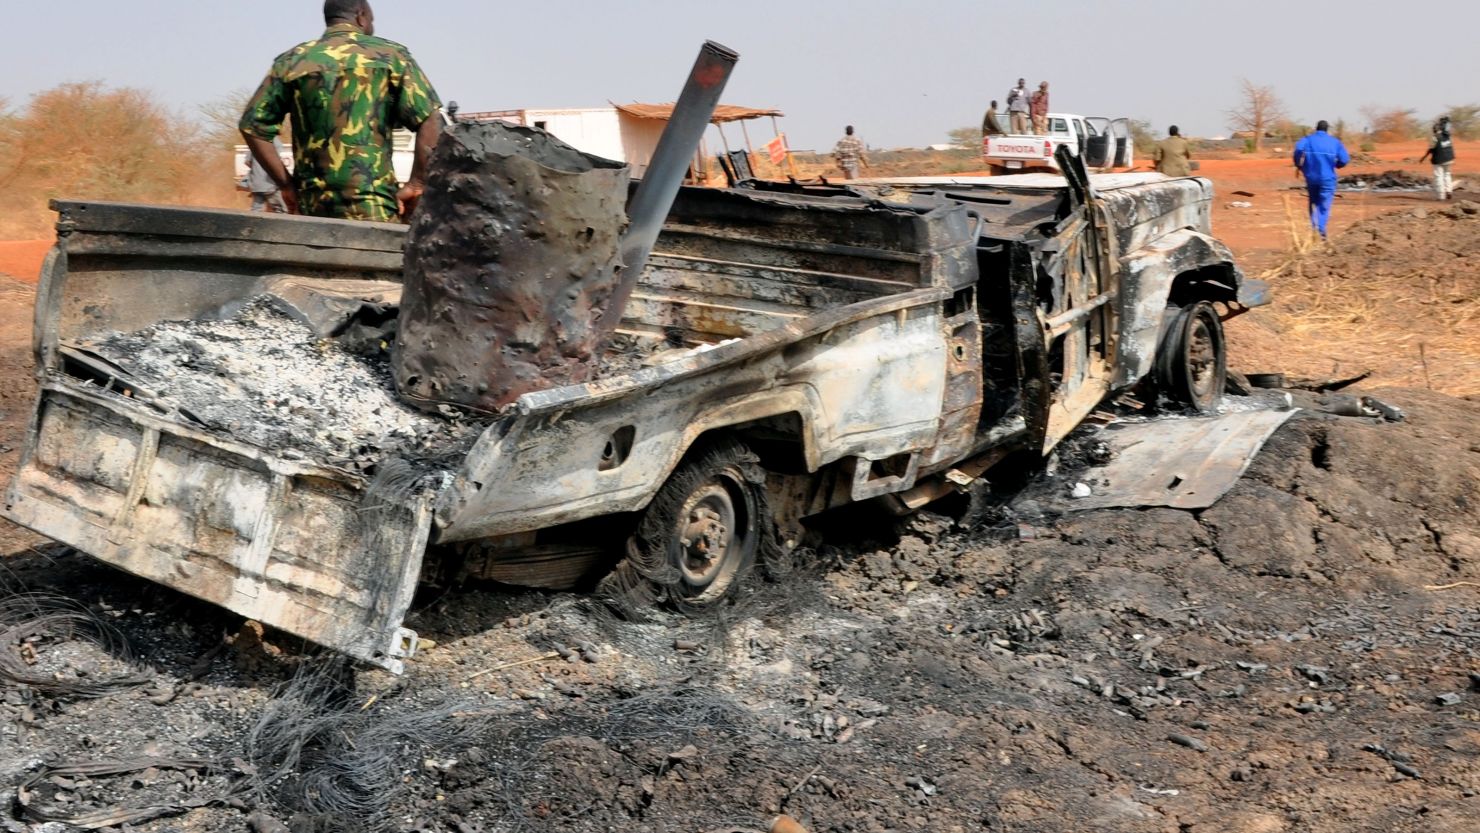 A burnt military vehicle sits where South Sudanese troops and Sudan government forces clashed along the border near Hegleg, the central area for Sudan's oil production.